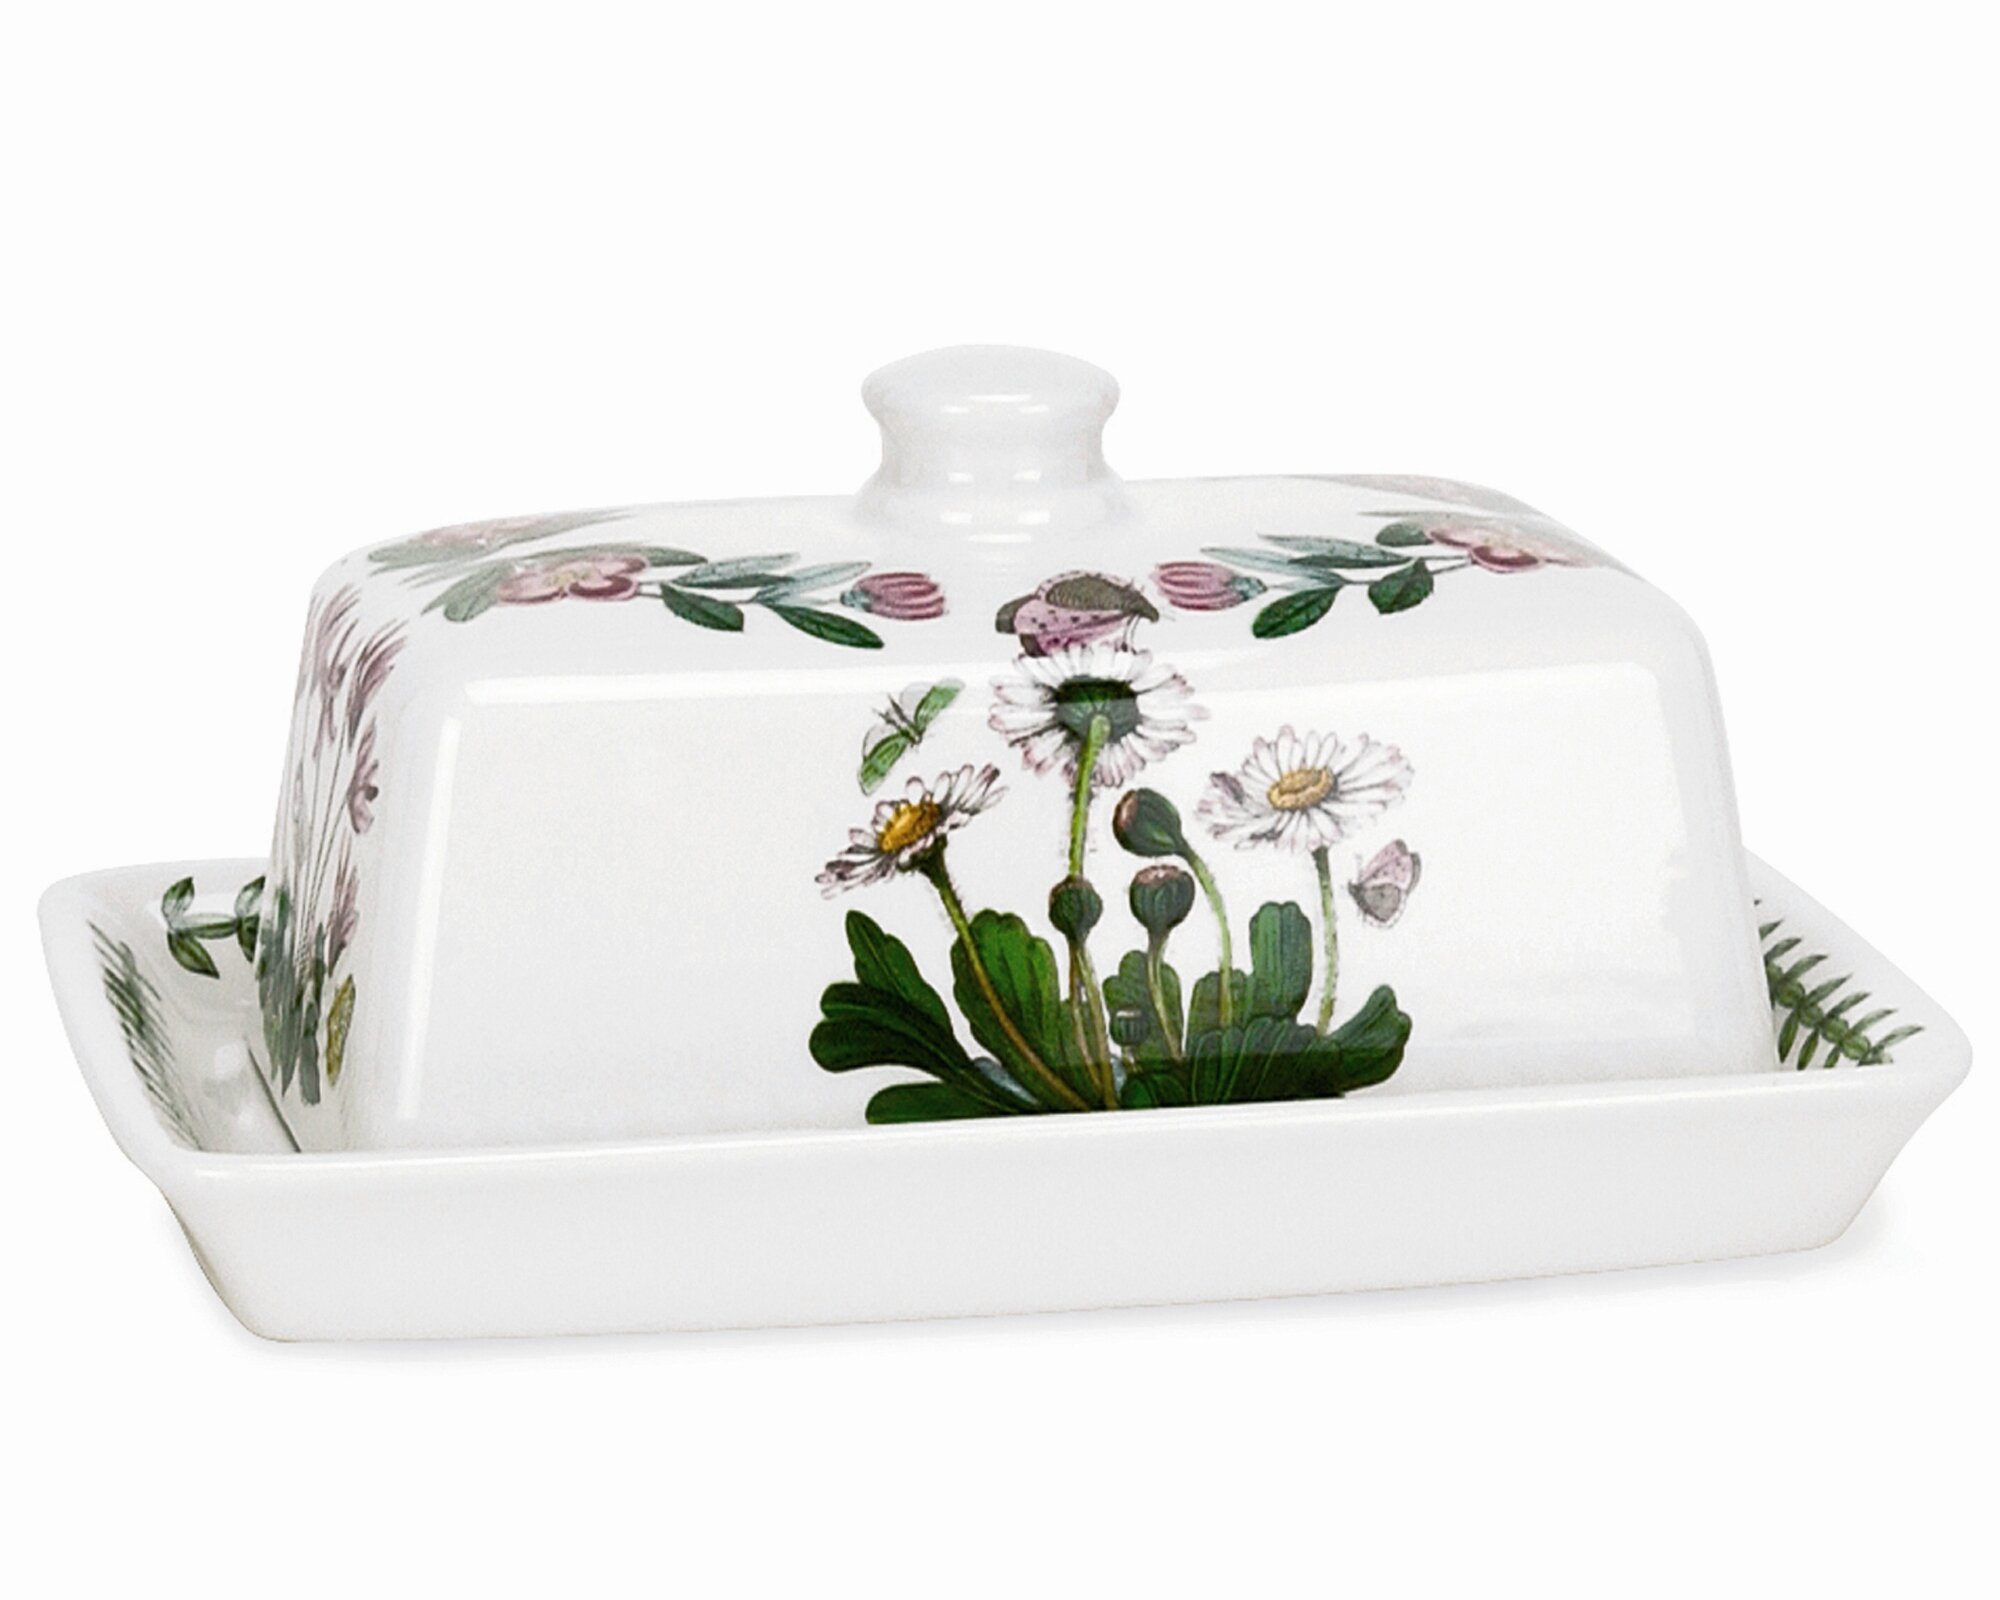 Portmeirion Botanic Garden Butter Dish with Handle Top Free Shipping New 